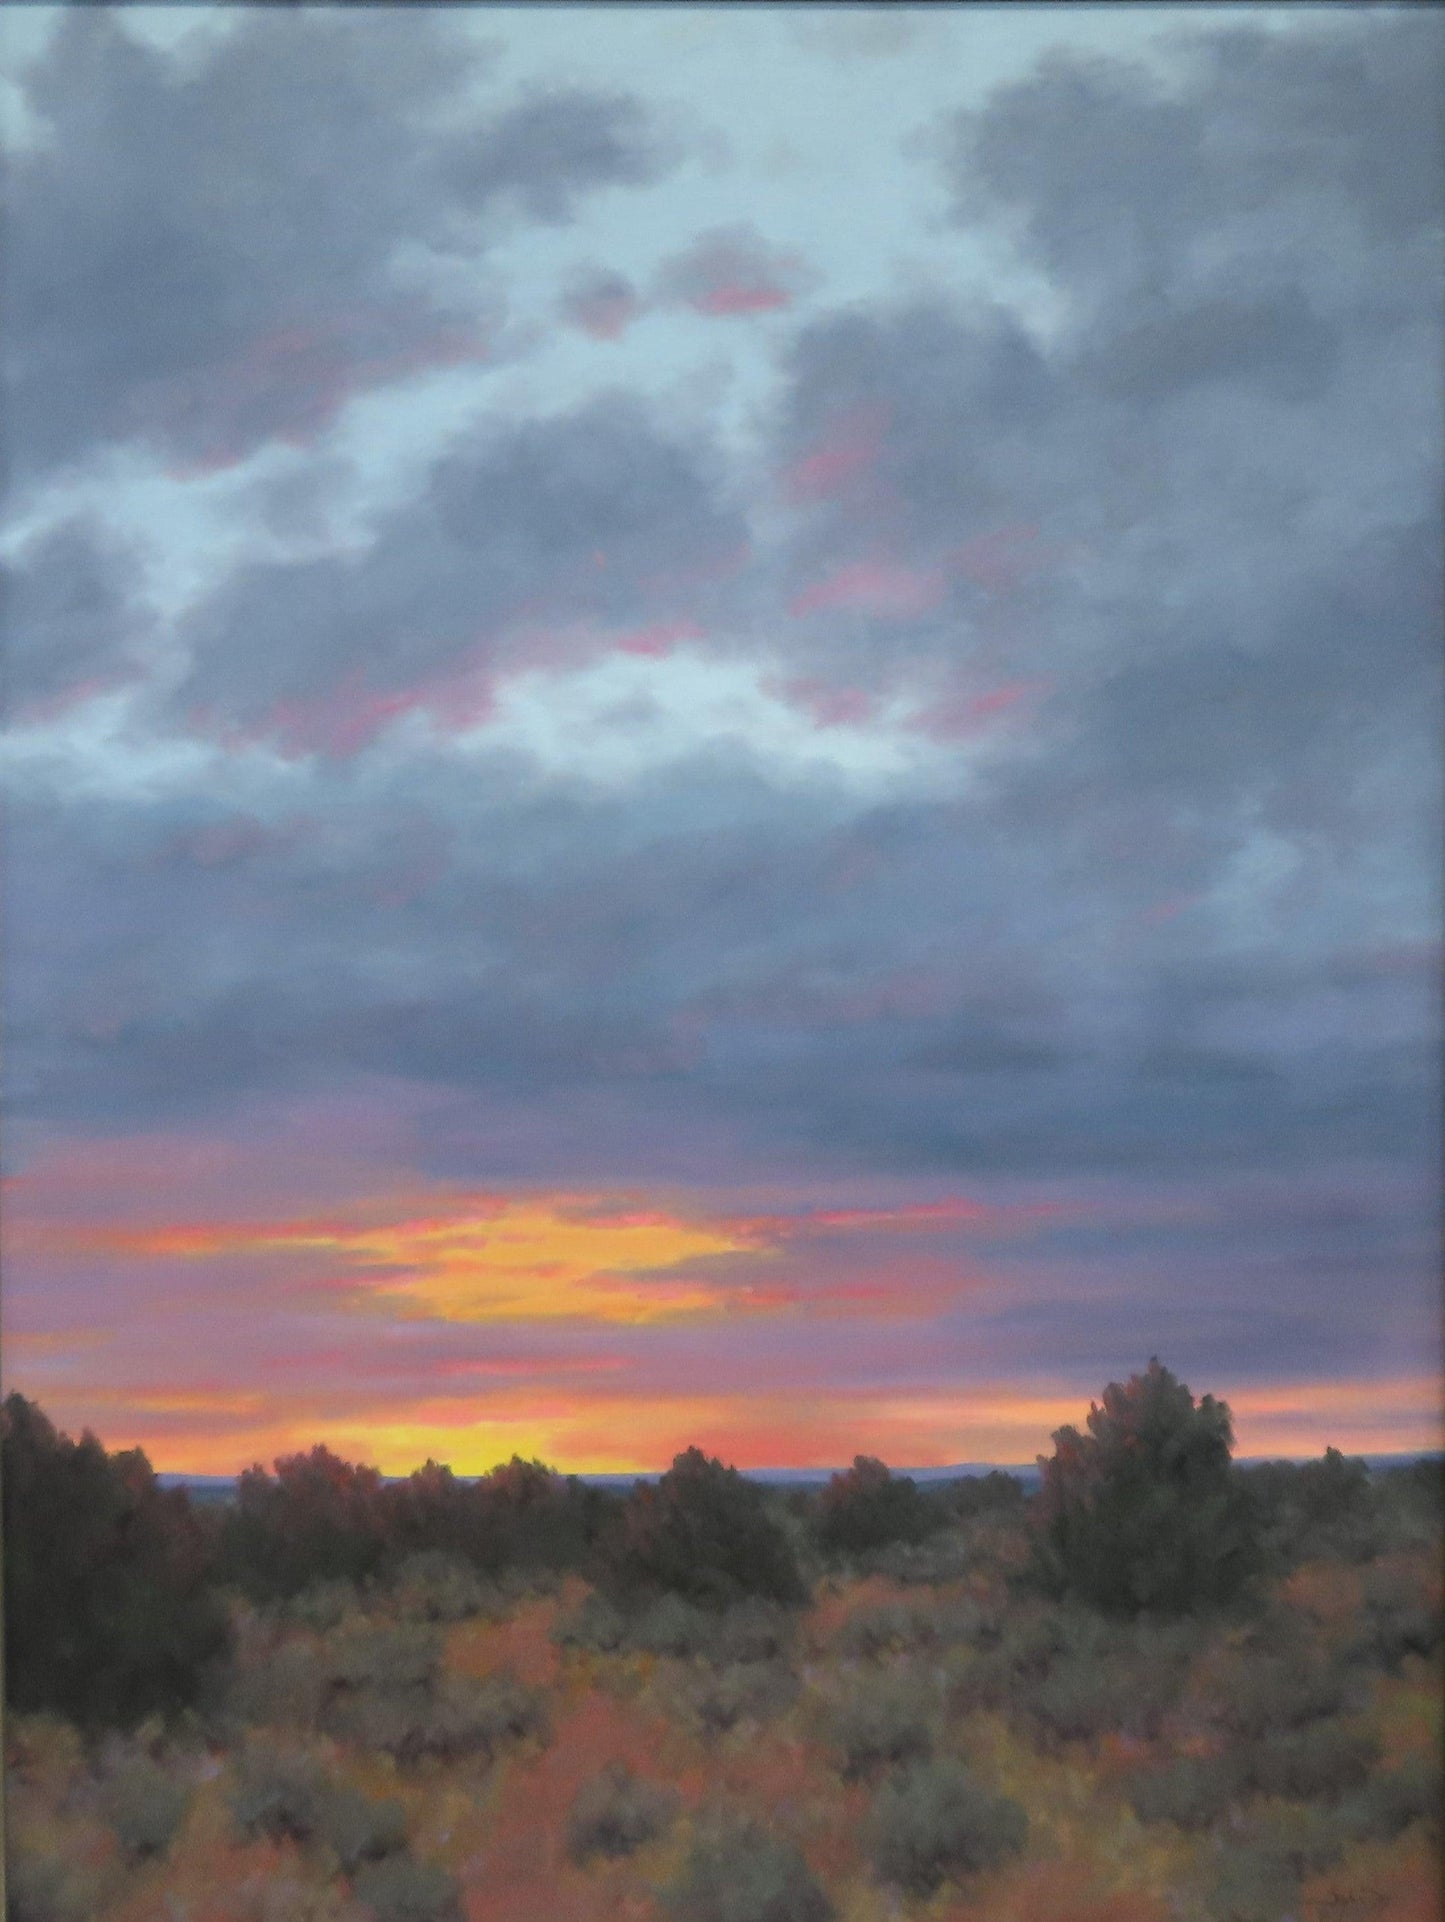 Grand New Mexico Sky-painting-Stephen Day-Sorrel Sky Gallery